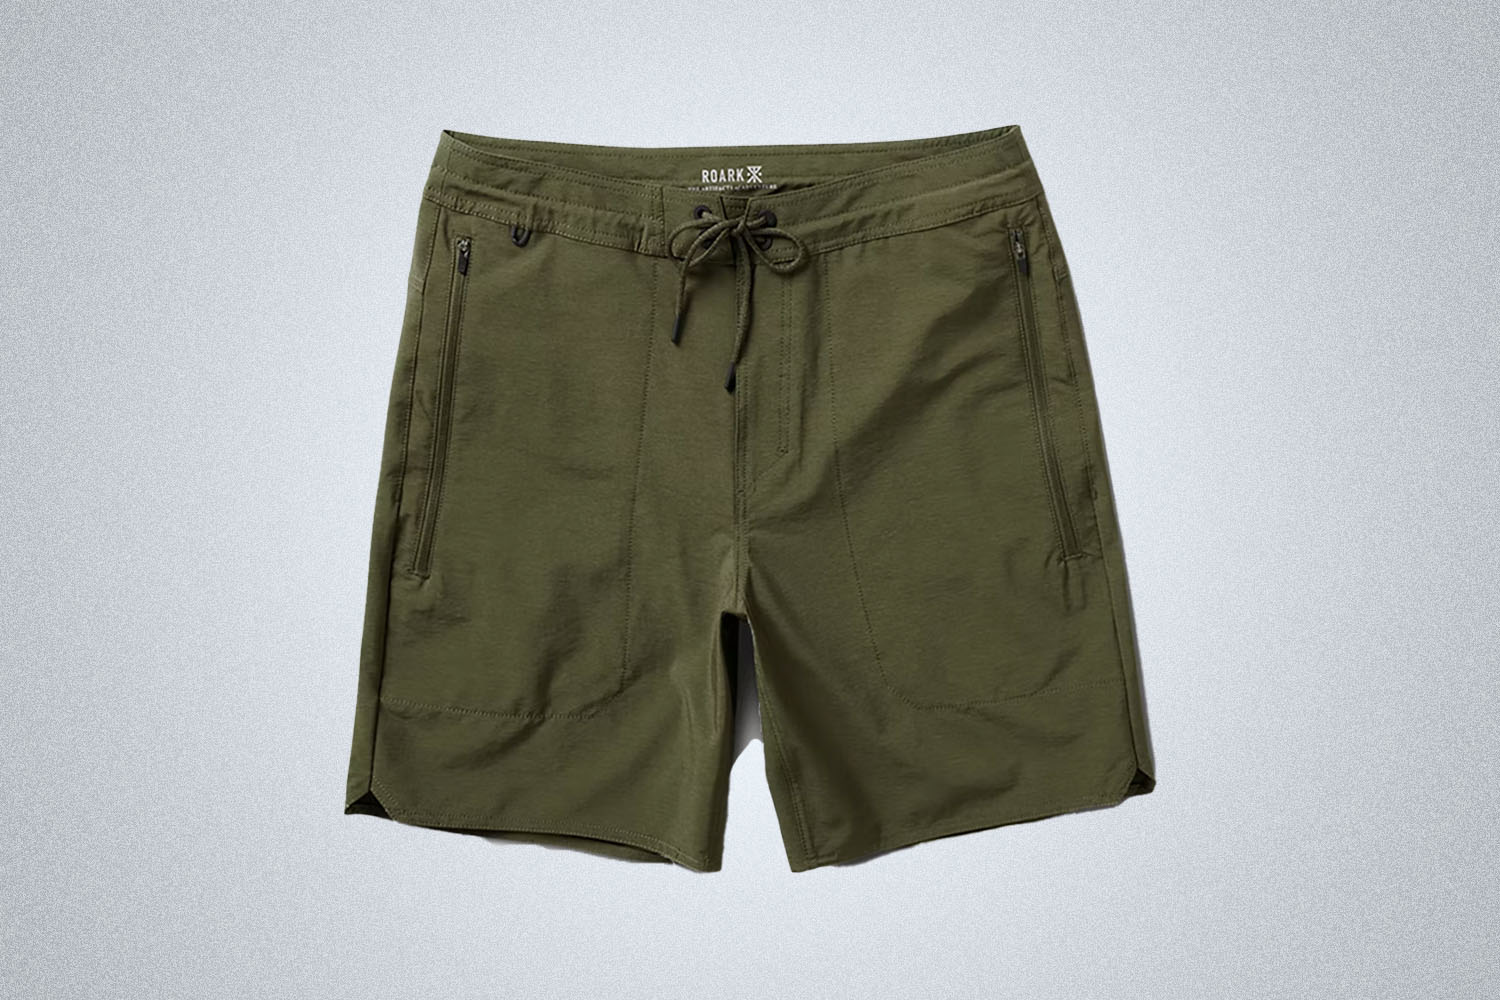 a pair of green technical shorts from Roark on a grey background